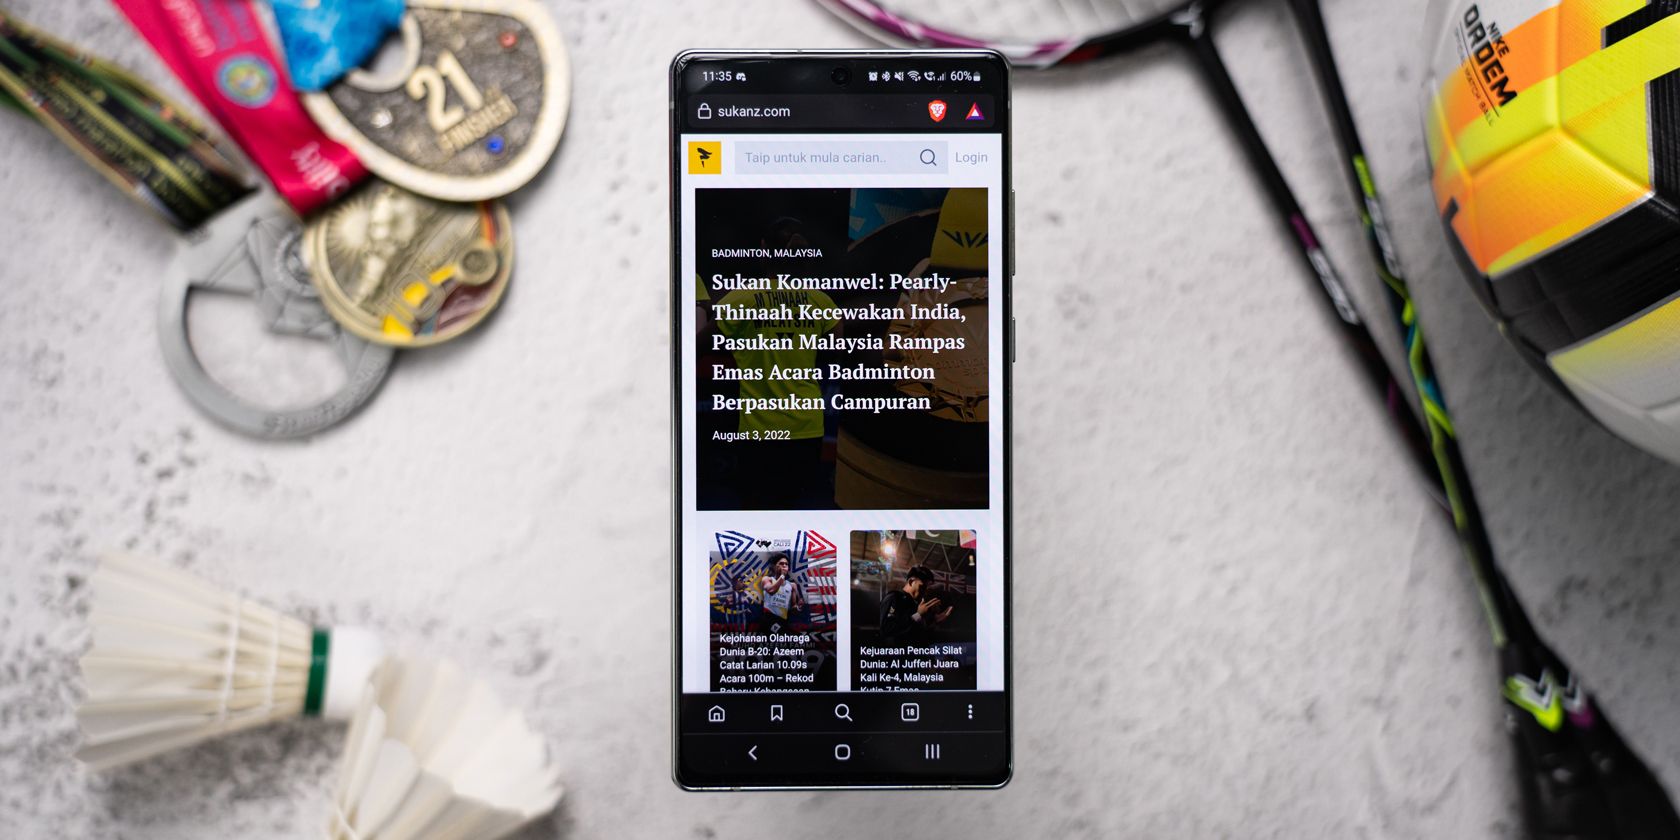 Smartphone on a table with news articles loaded on screen